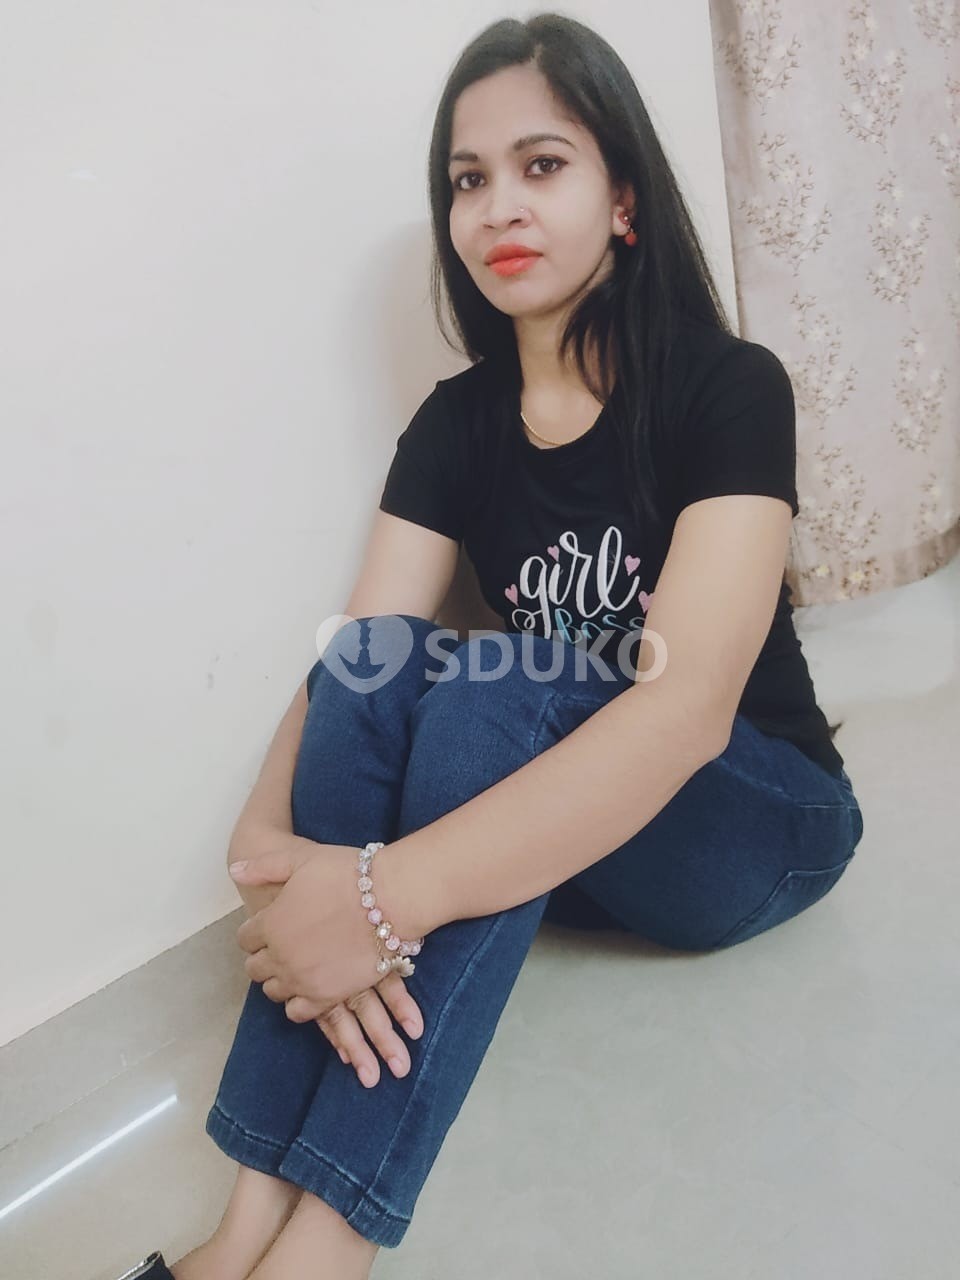 MAHIM ❣️ BEST ESCORT TODAY LOW PRICE 100% SAFE AND SECURE GENUINE CALL GIRL AFFORDABLE PRICE CALL NOW